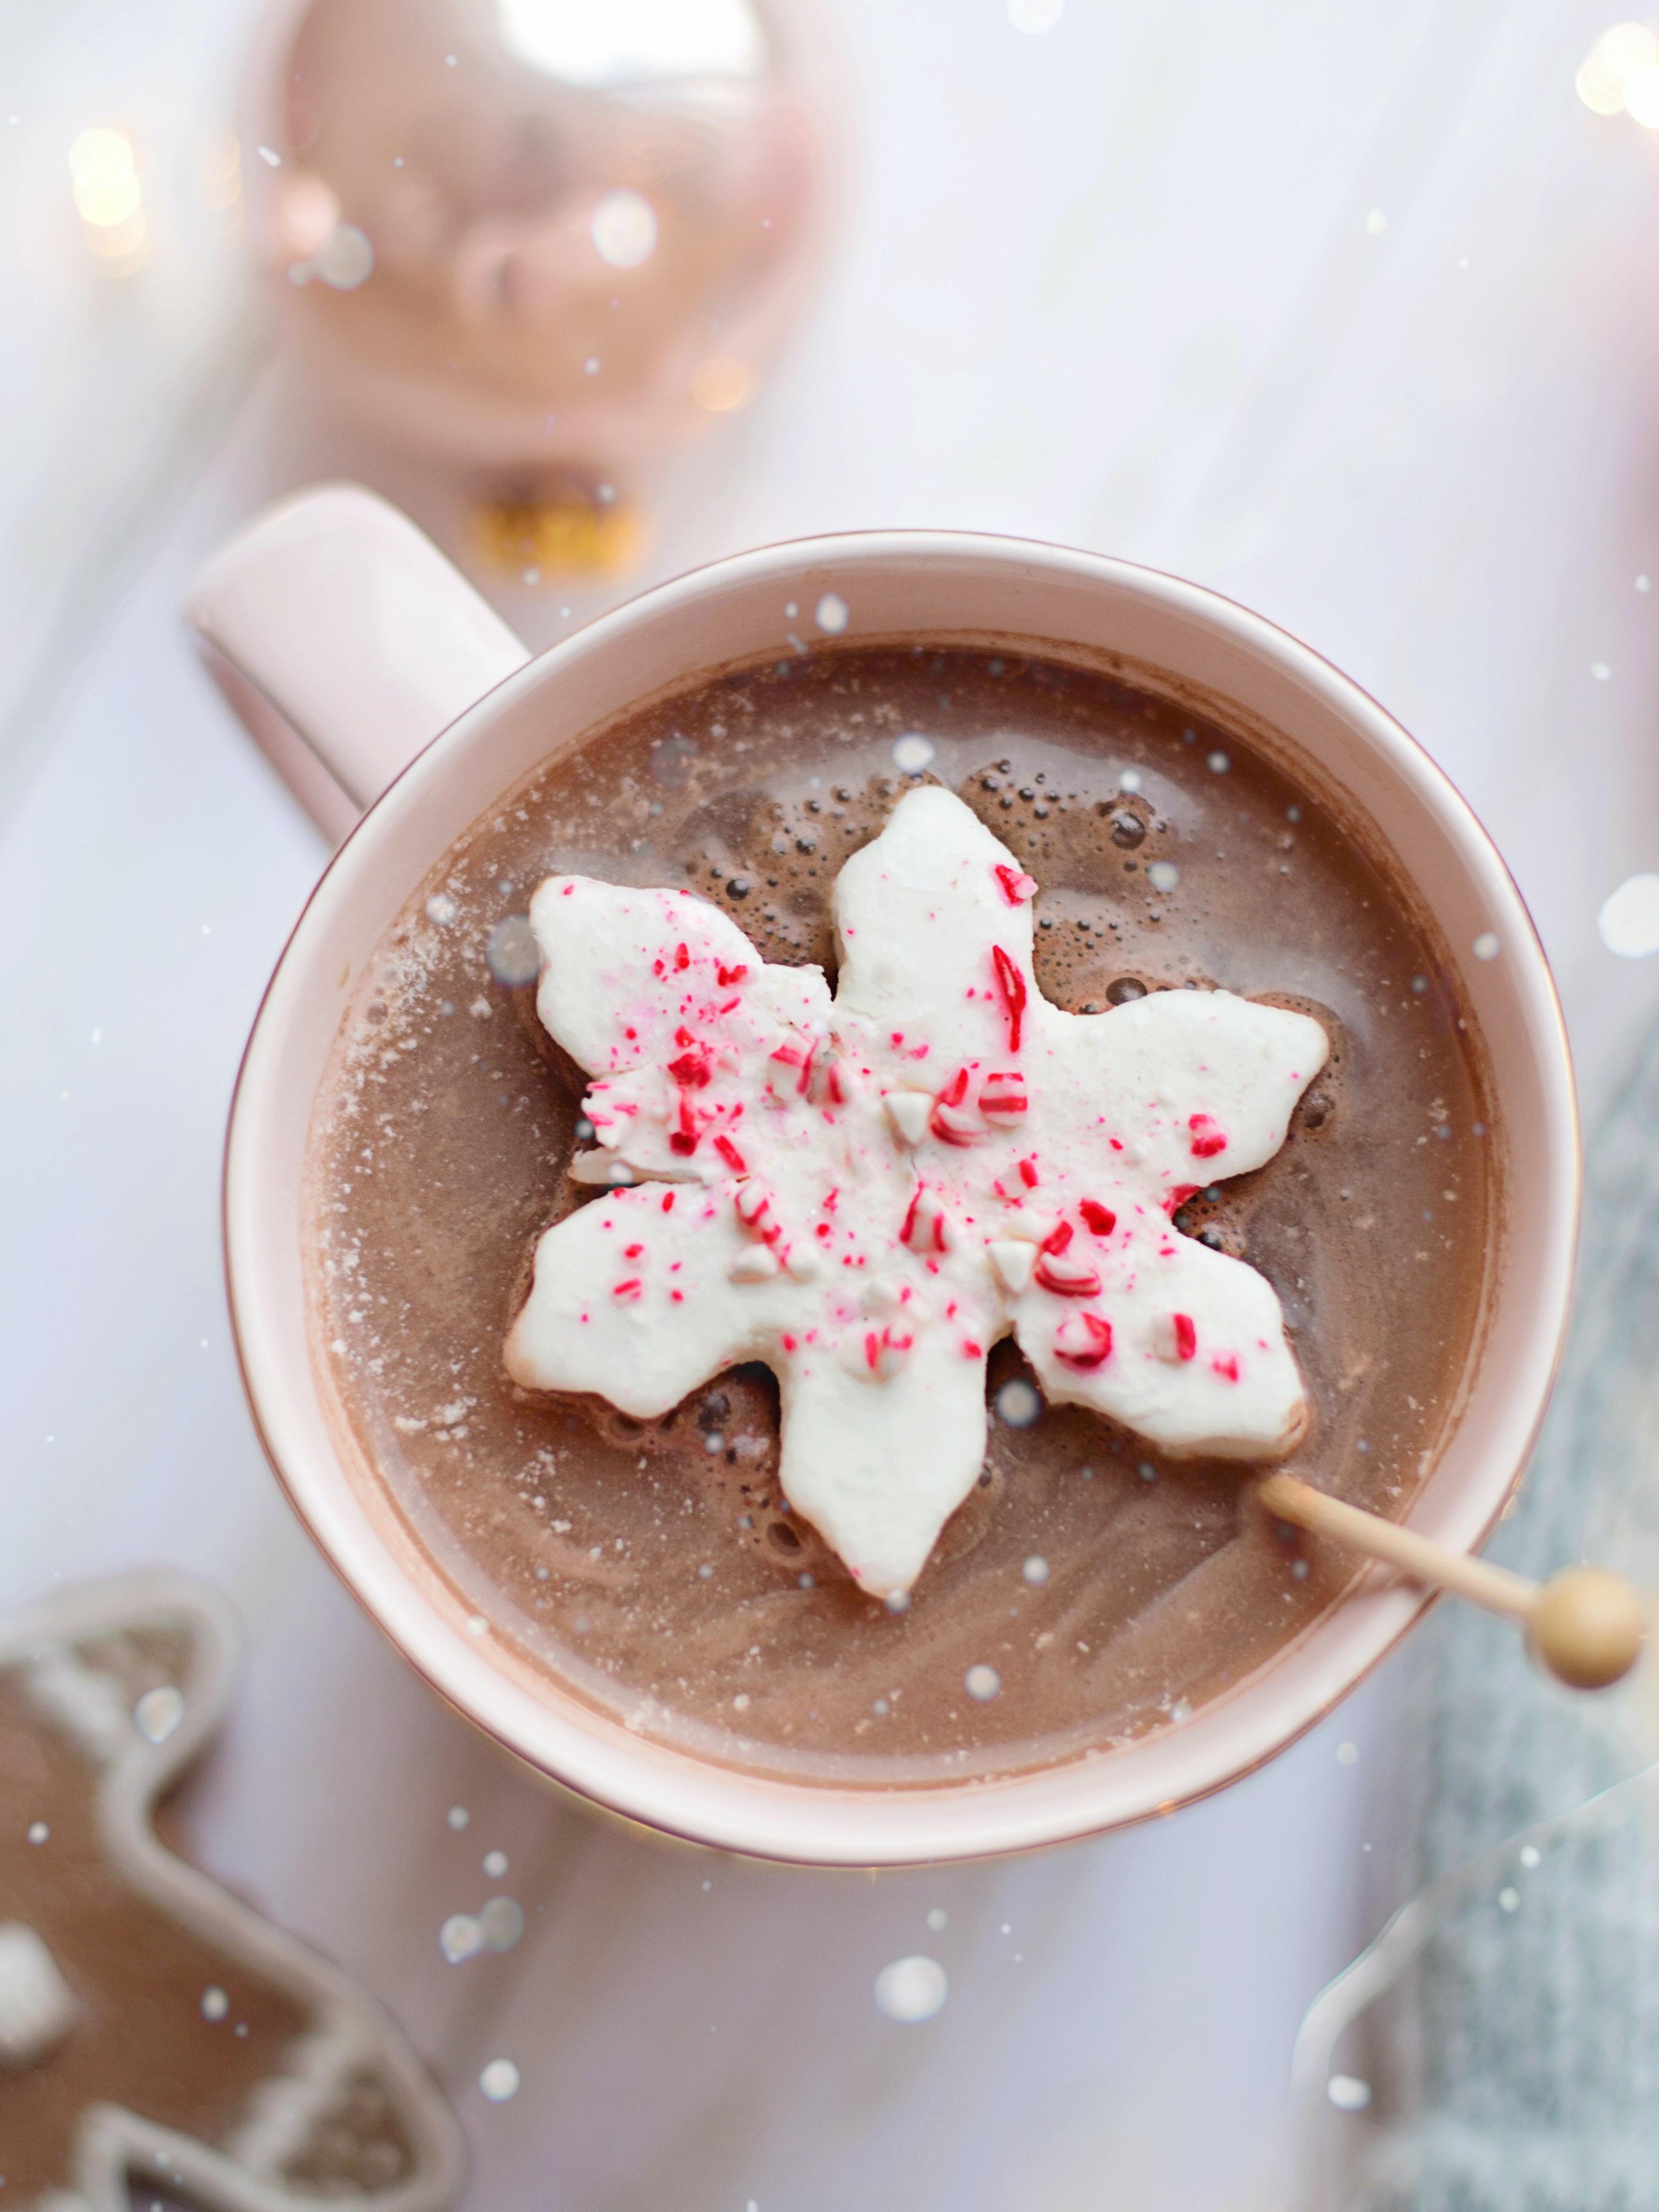 hot cocoa and cookies